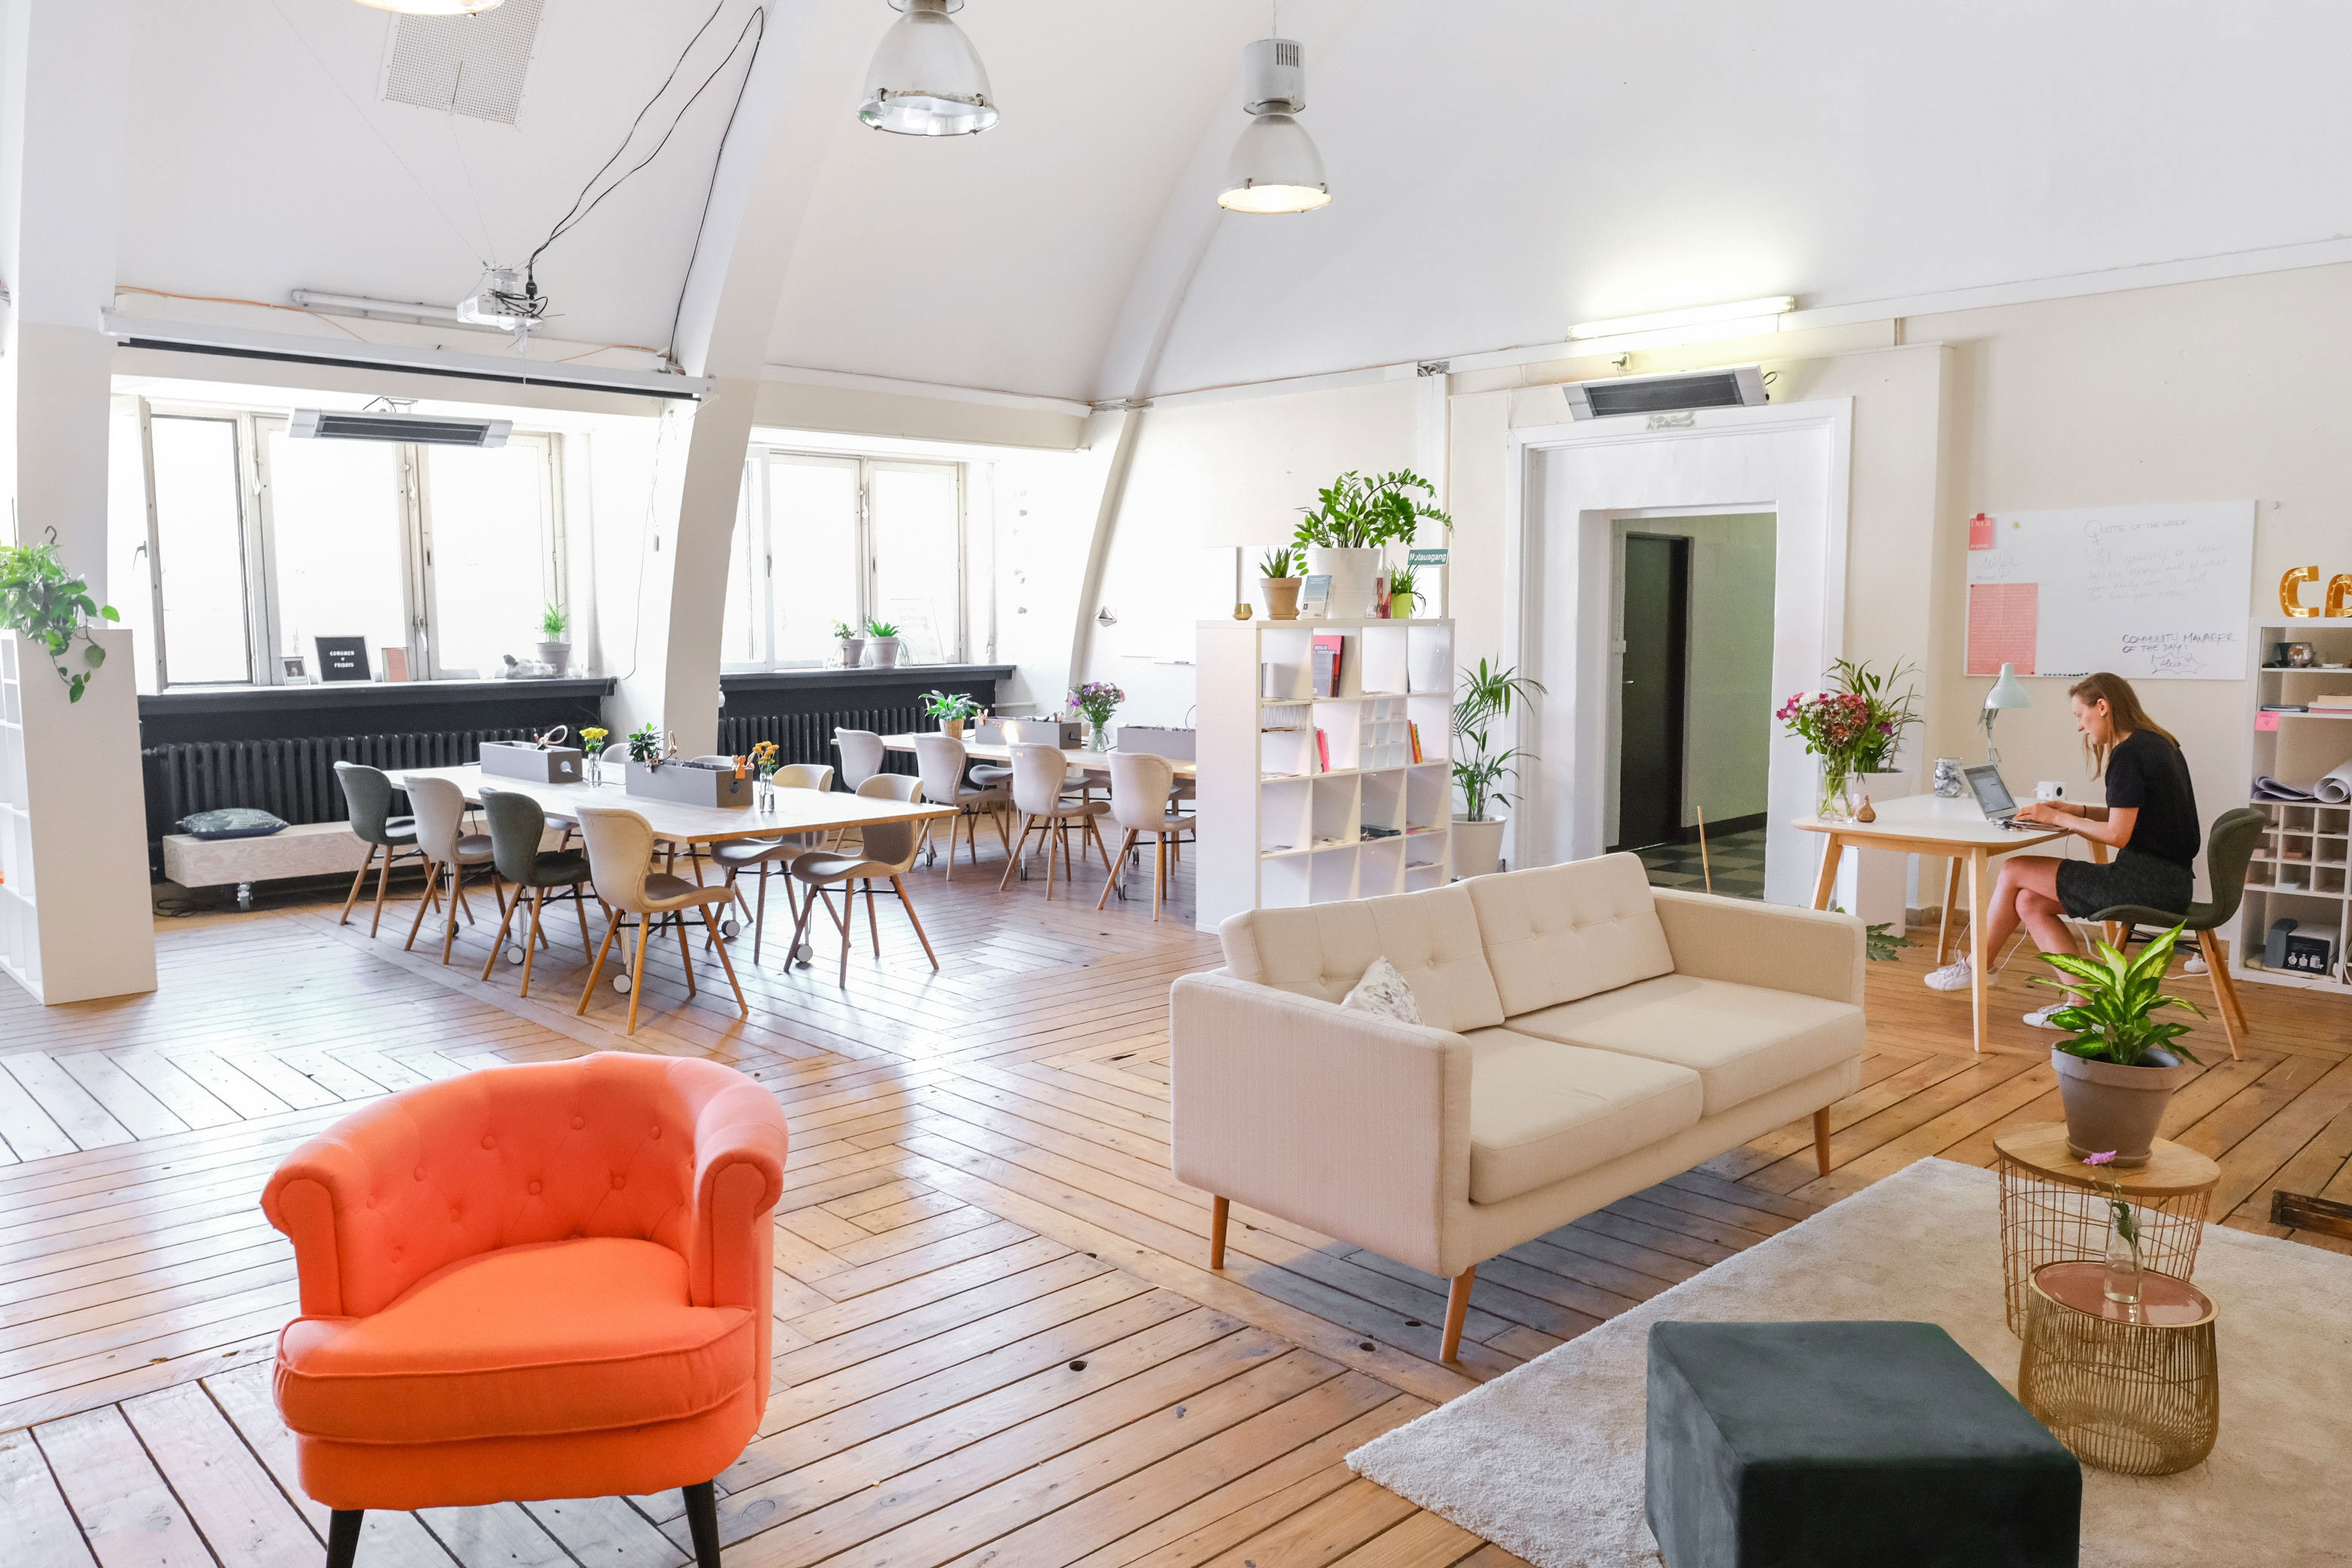 Co-living spaces are disrupting Asia’s real estate industry with a new way to look at modern office design